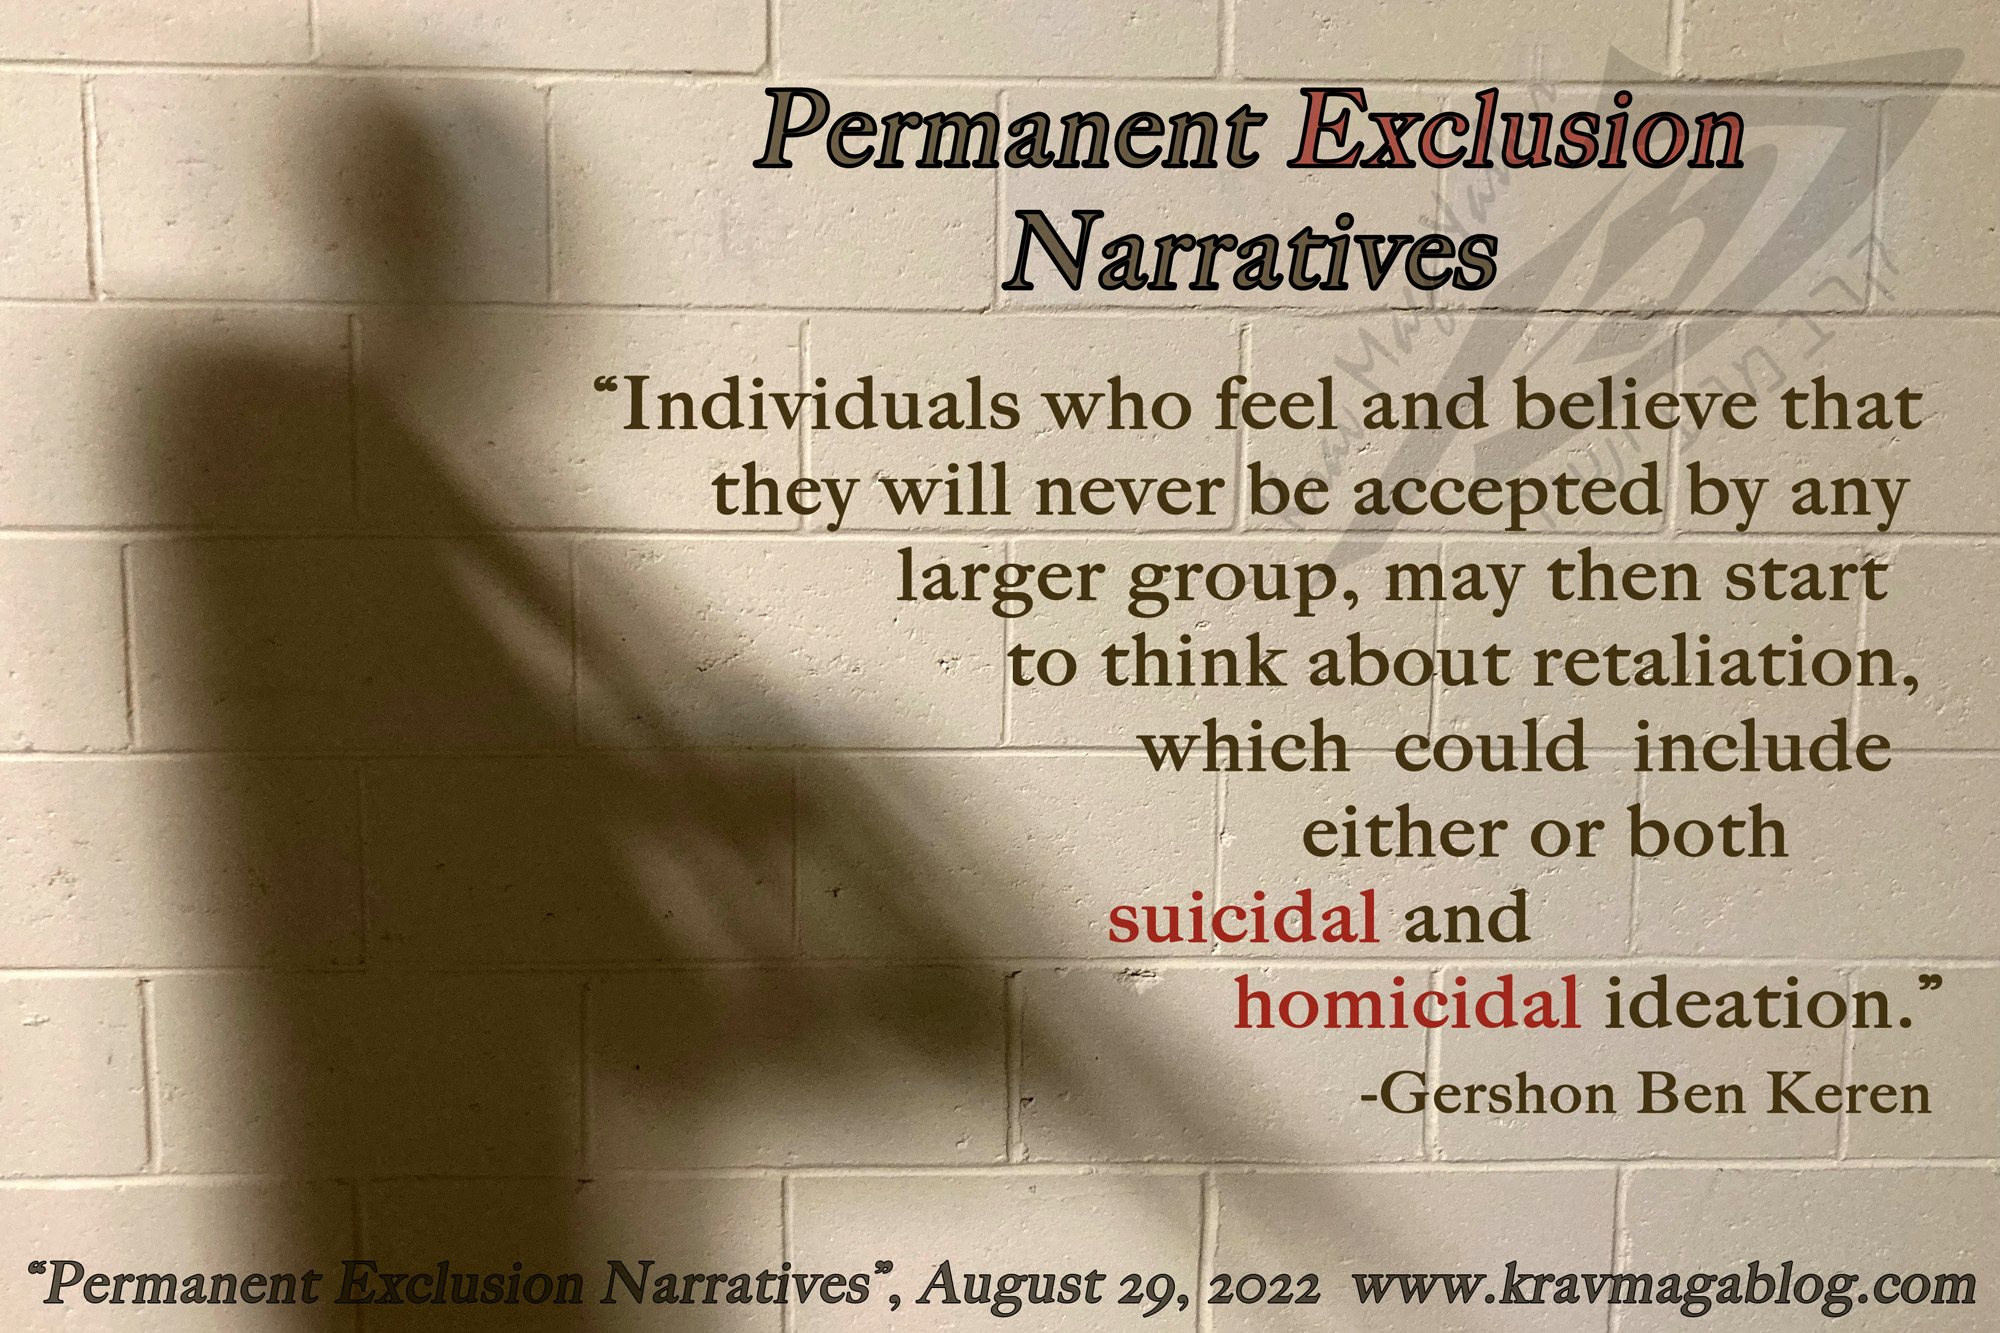 Blog About Permanent Exclusion Narratives